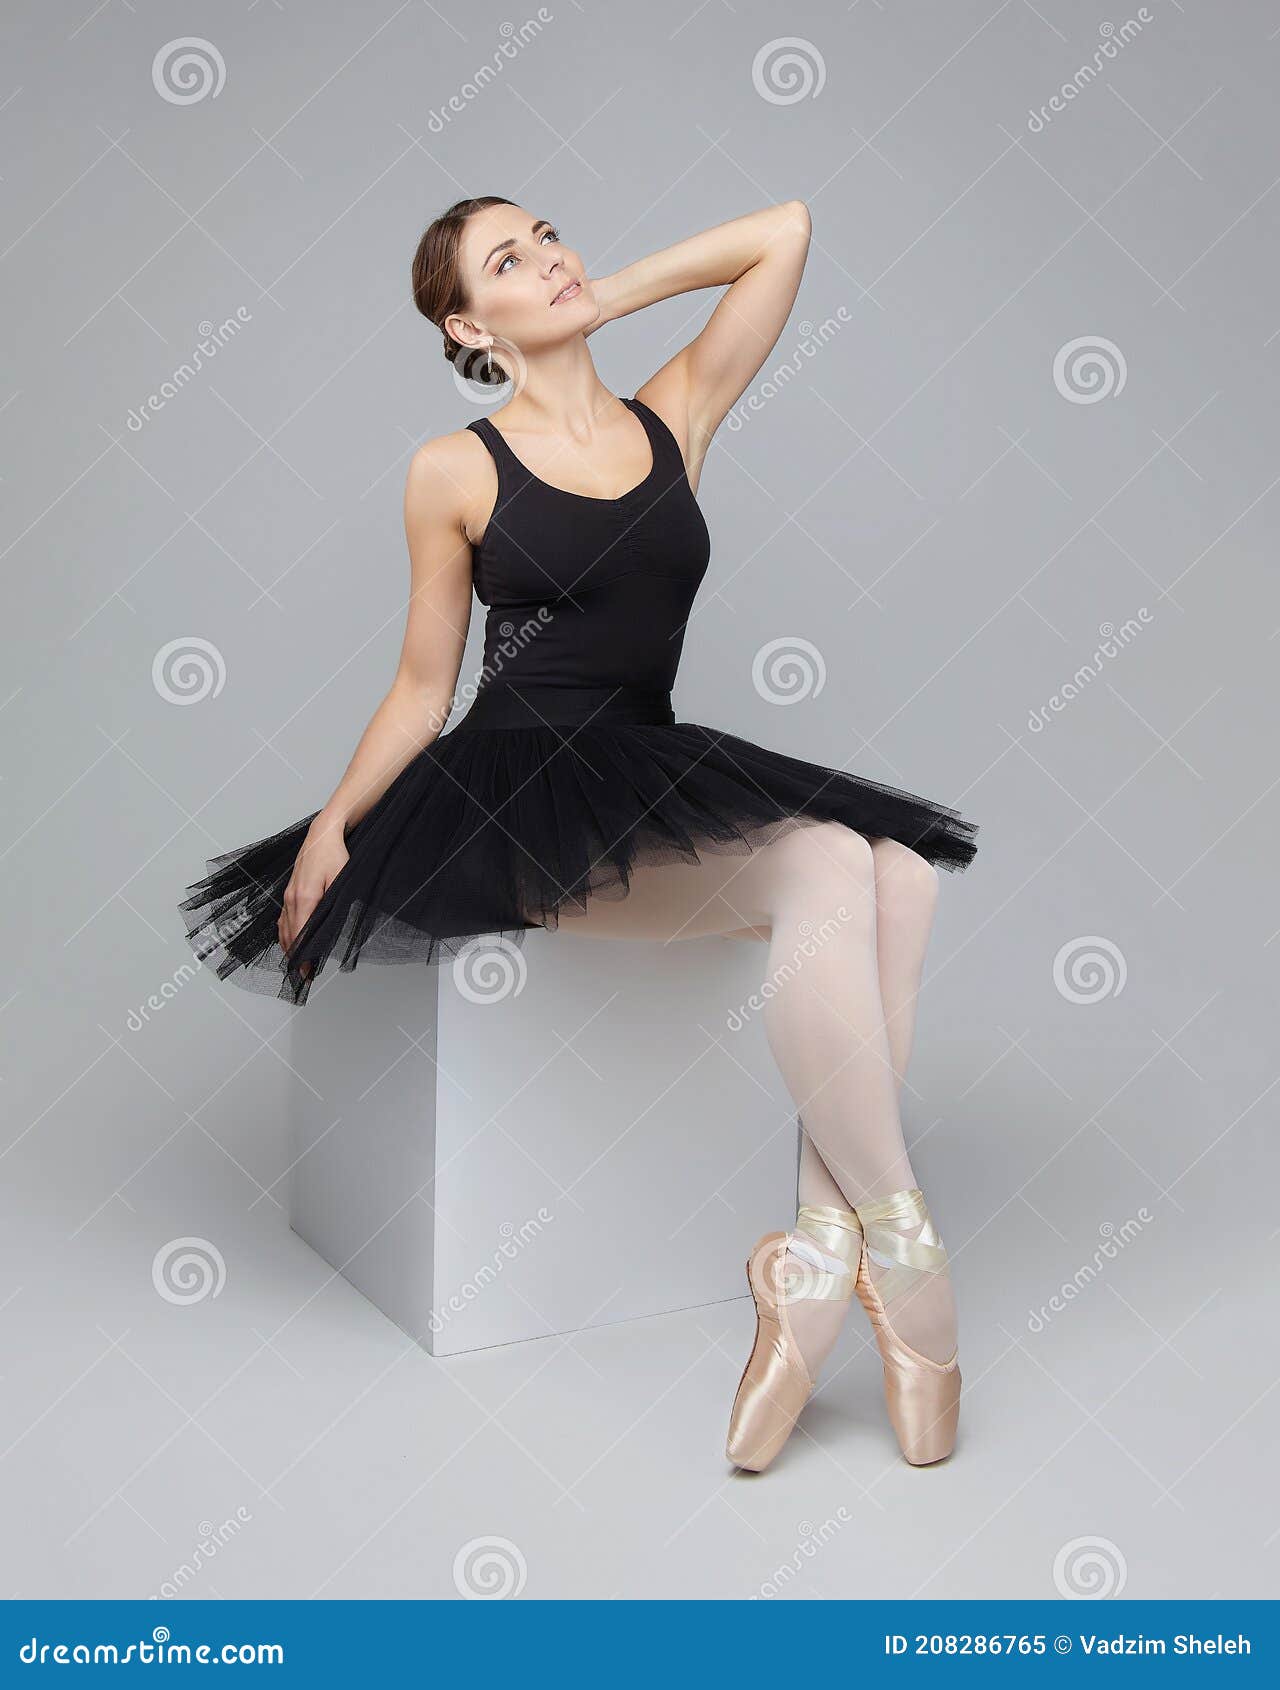 Attractive Poses Gracefully while Sitting on a Cube. Photo Shoot in the Studio on a White Background Stock Image - Image of elegance, exercise: 208286765